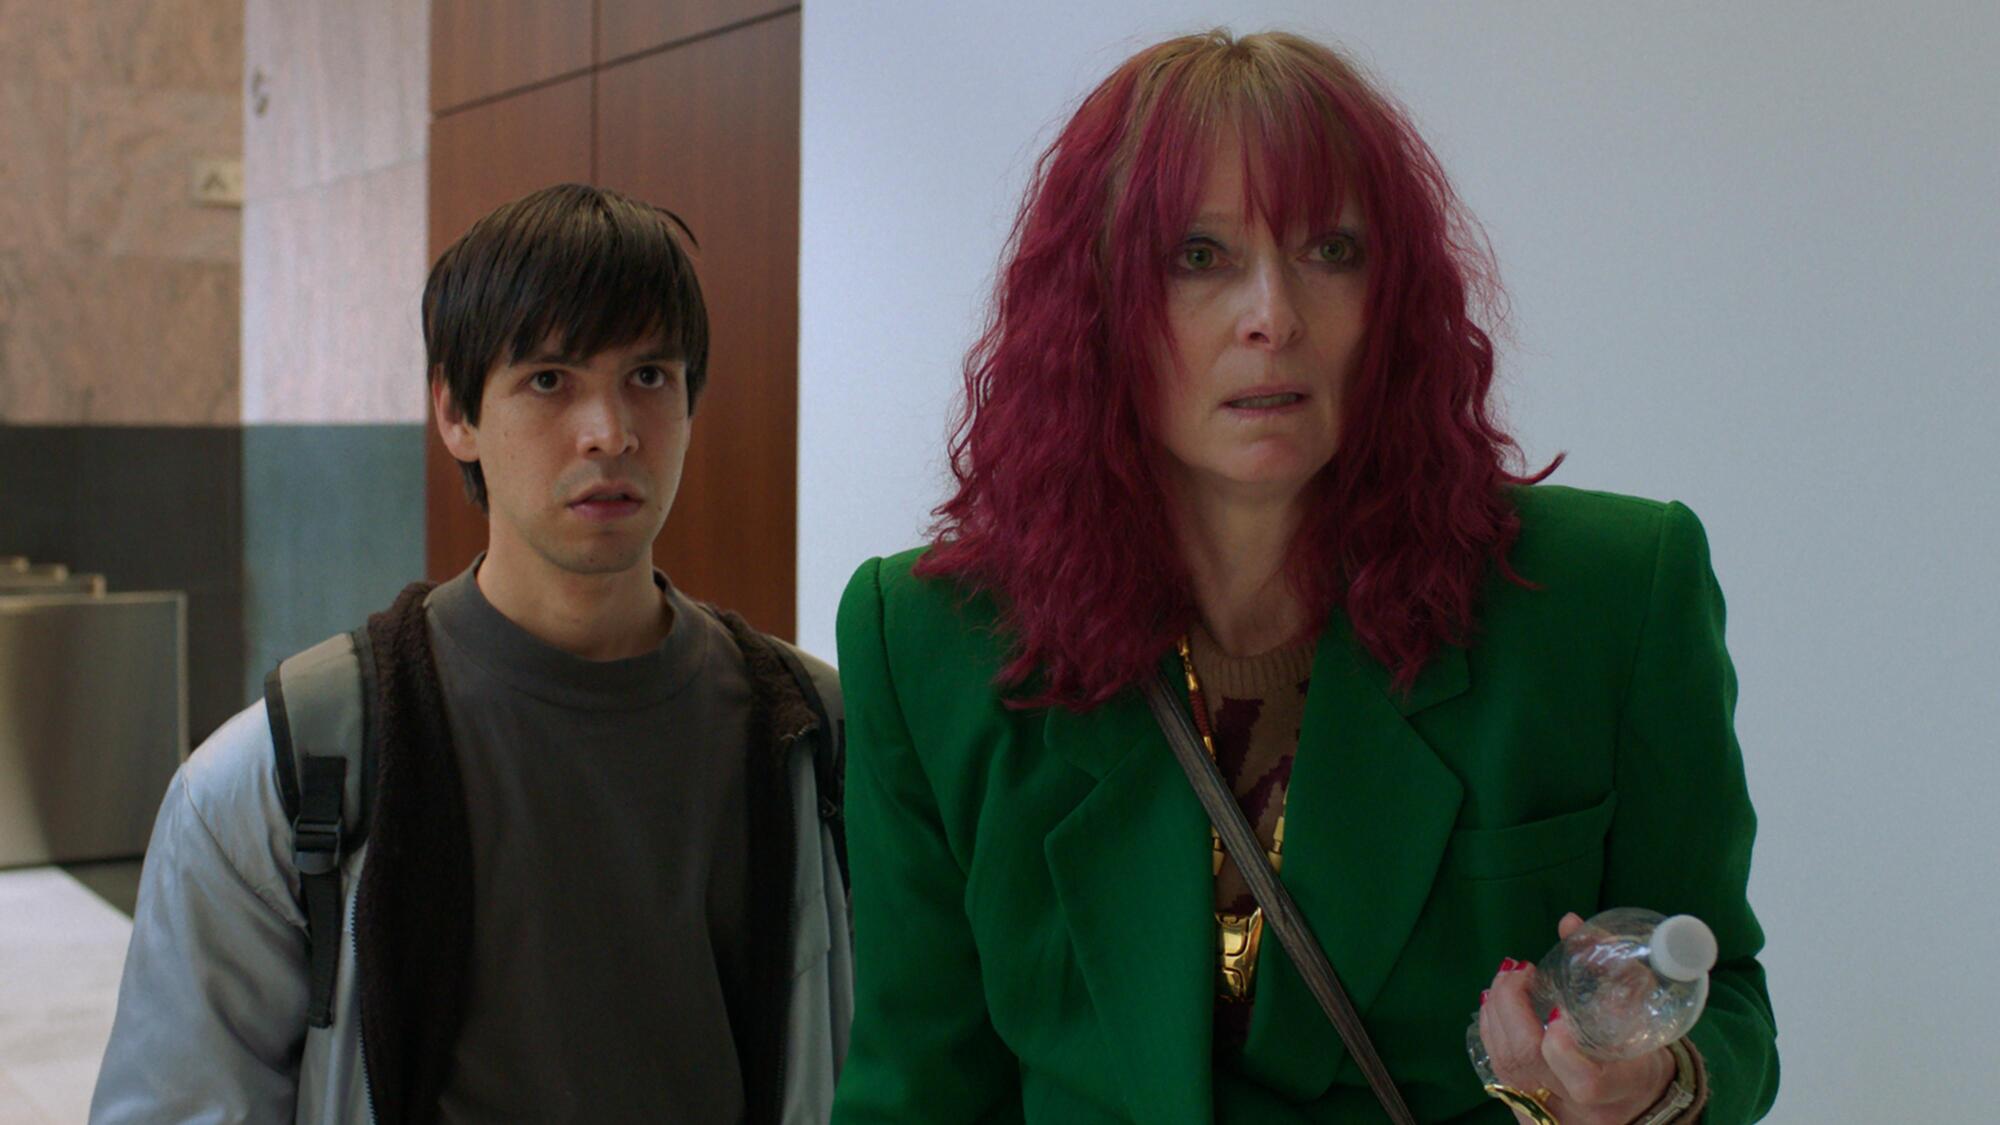 An assistant in a dowdy sweatshirt and backpack accompanies his red-haired boss.